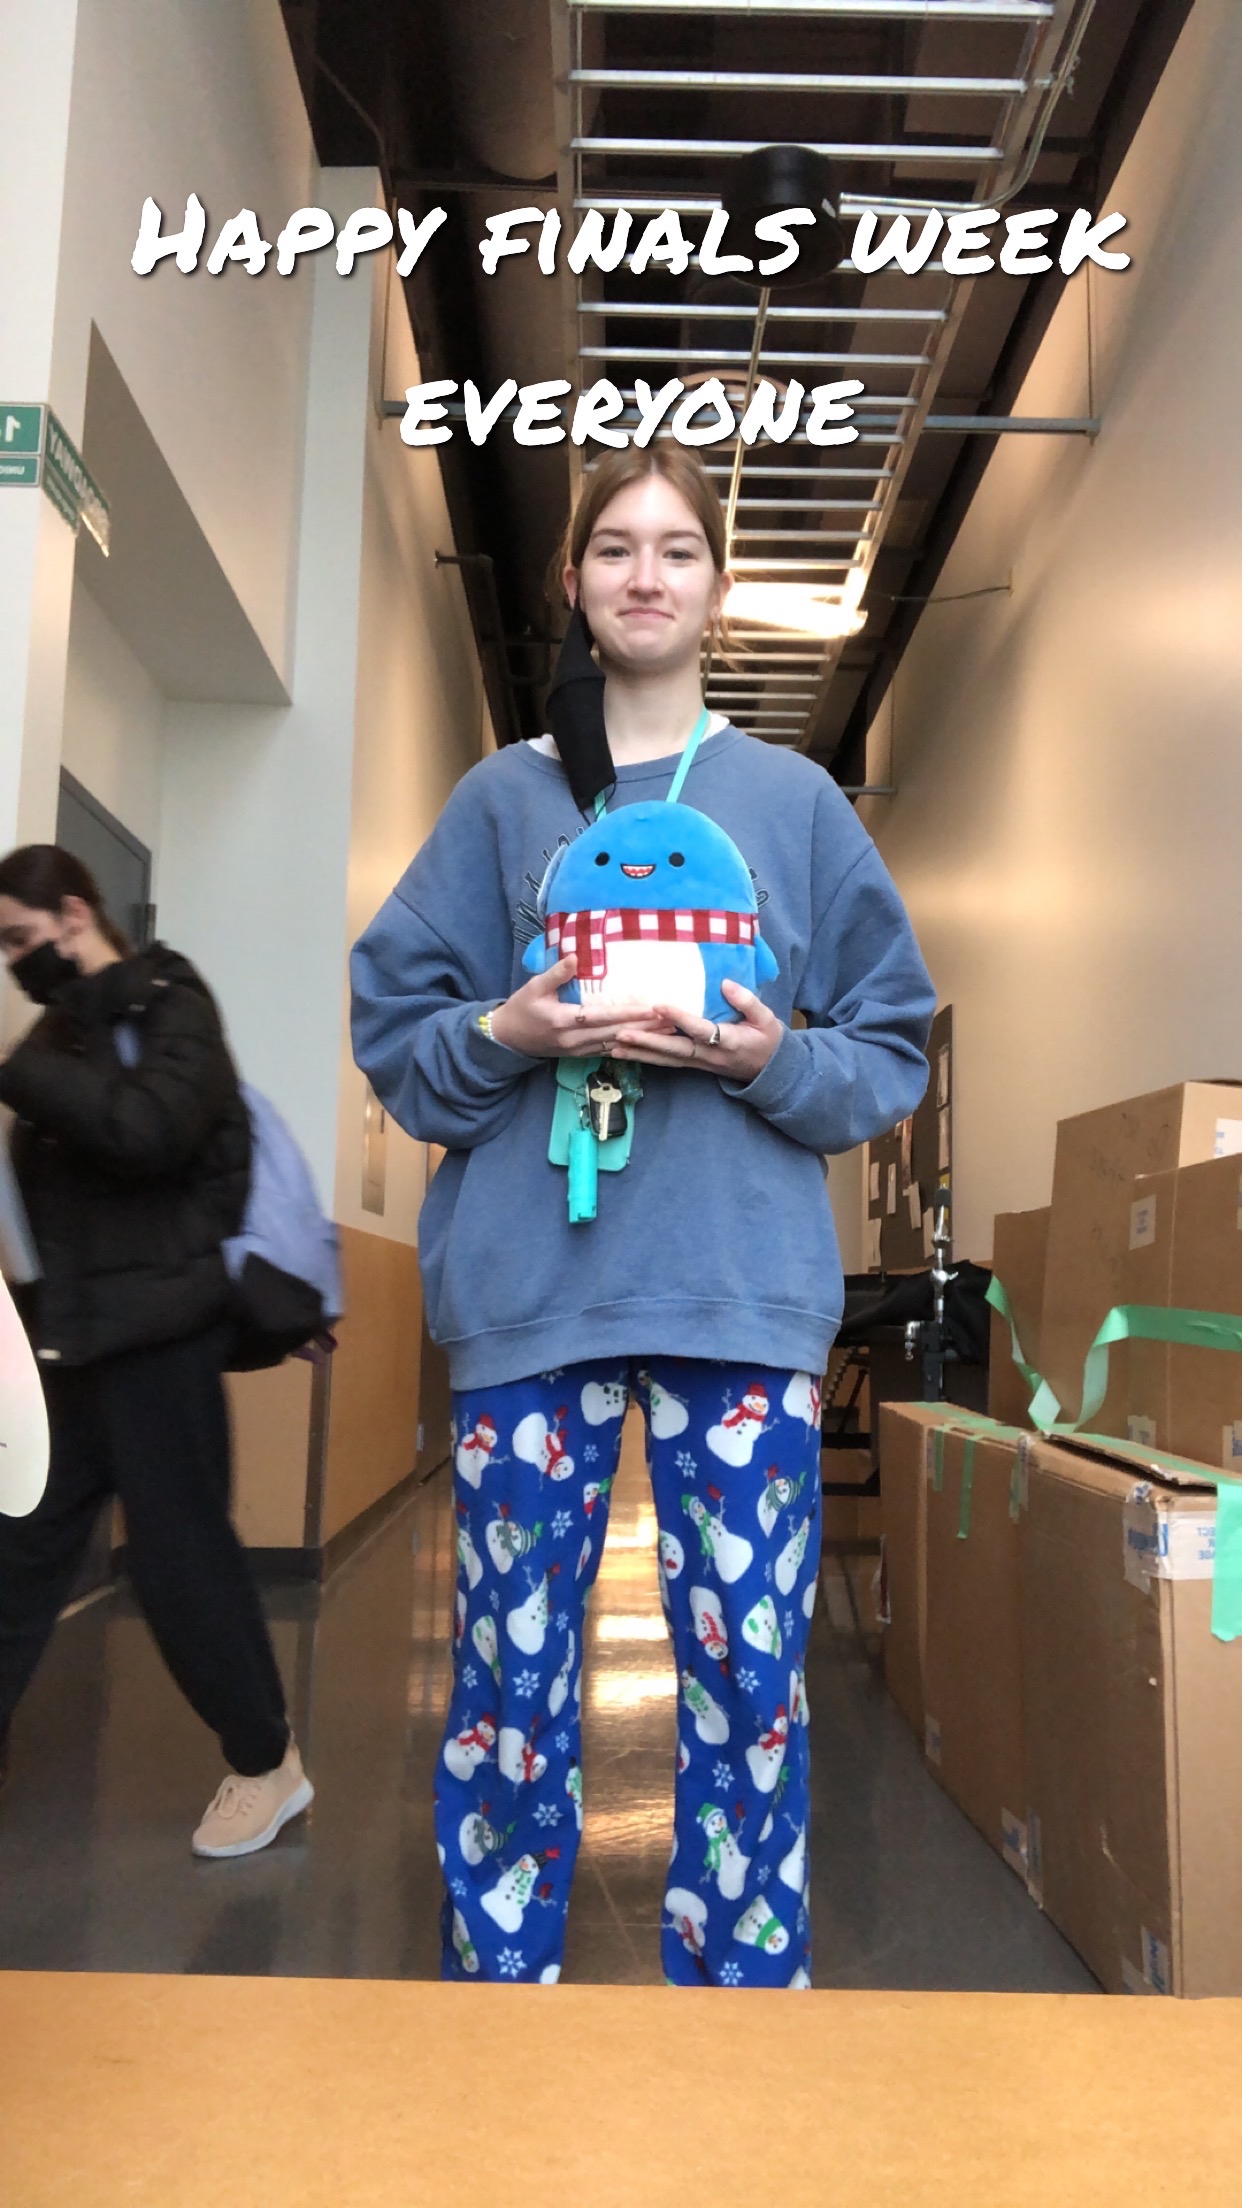 Isabel is standing in a hallway dressed in holiday pajamas holding two thumbs up.